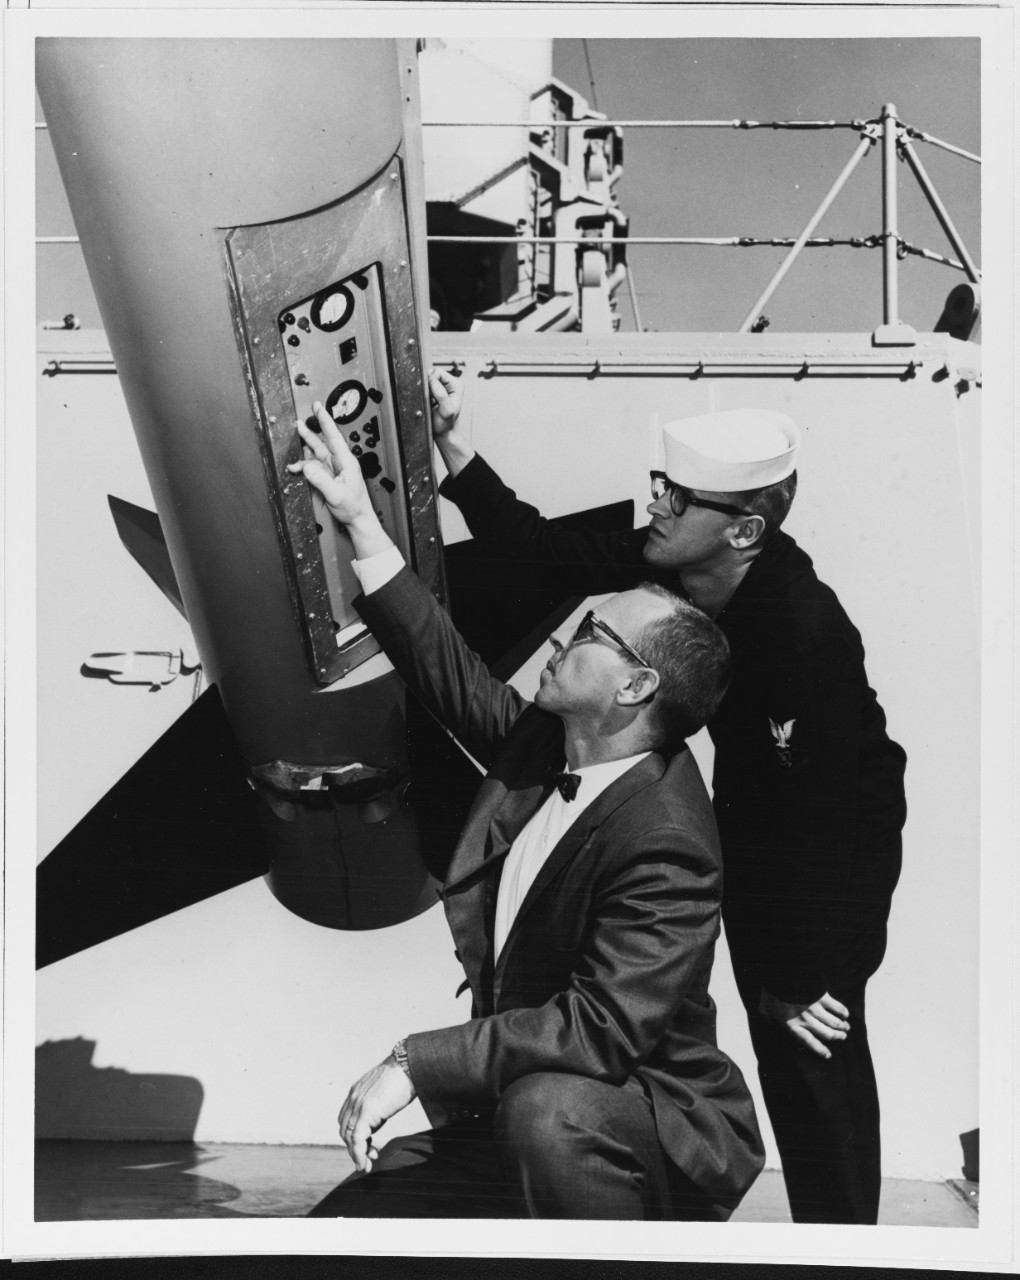 Men inspect Terrier Missile aboard DLG's tied up at San Diego Harbor, California. 5/19/1961